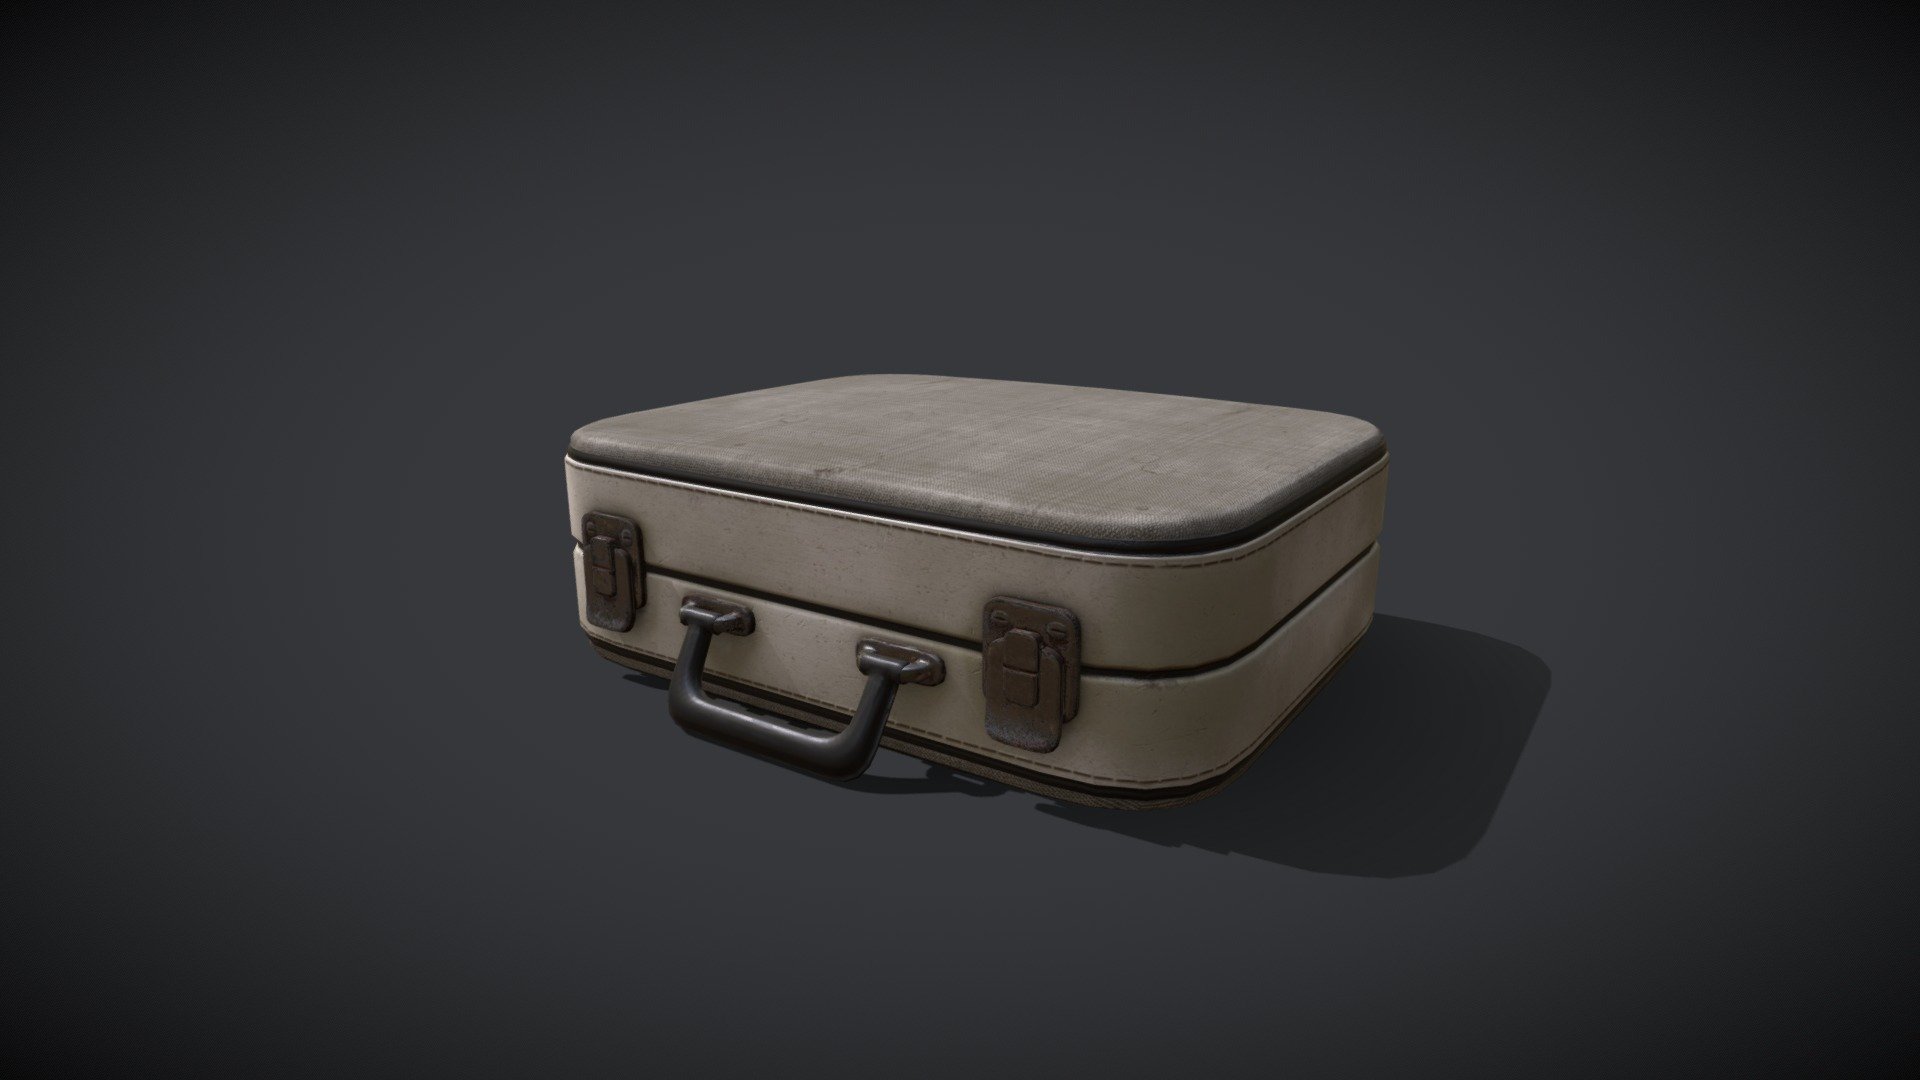 Old suitcase modeled in 3dsMax .Texturing in Substance Painter.
Suitable for a prop in games 3d model